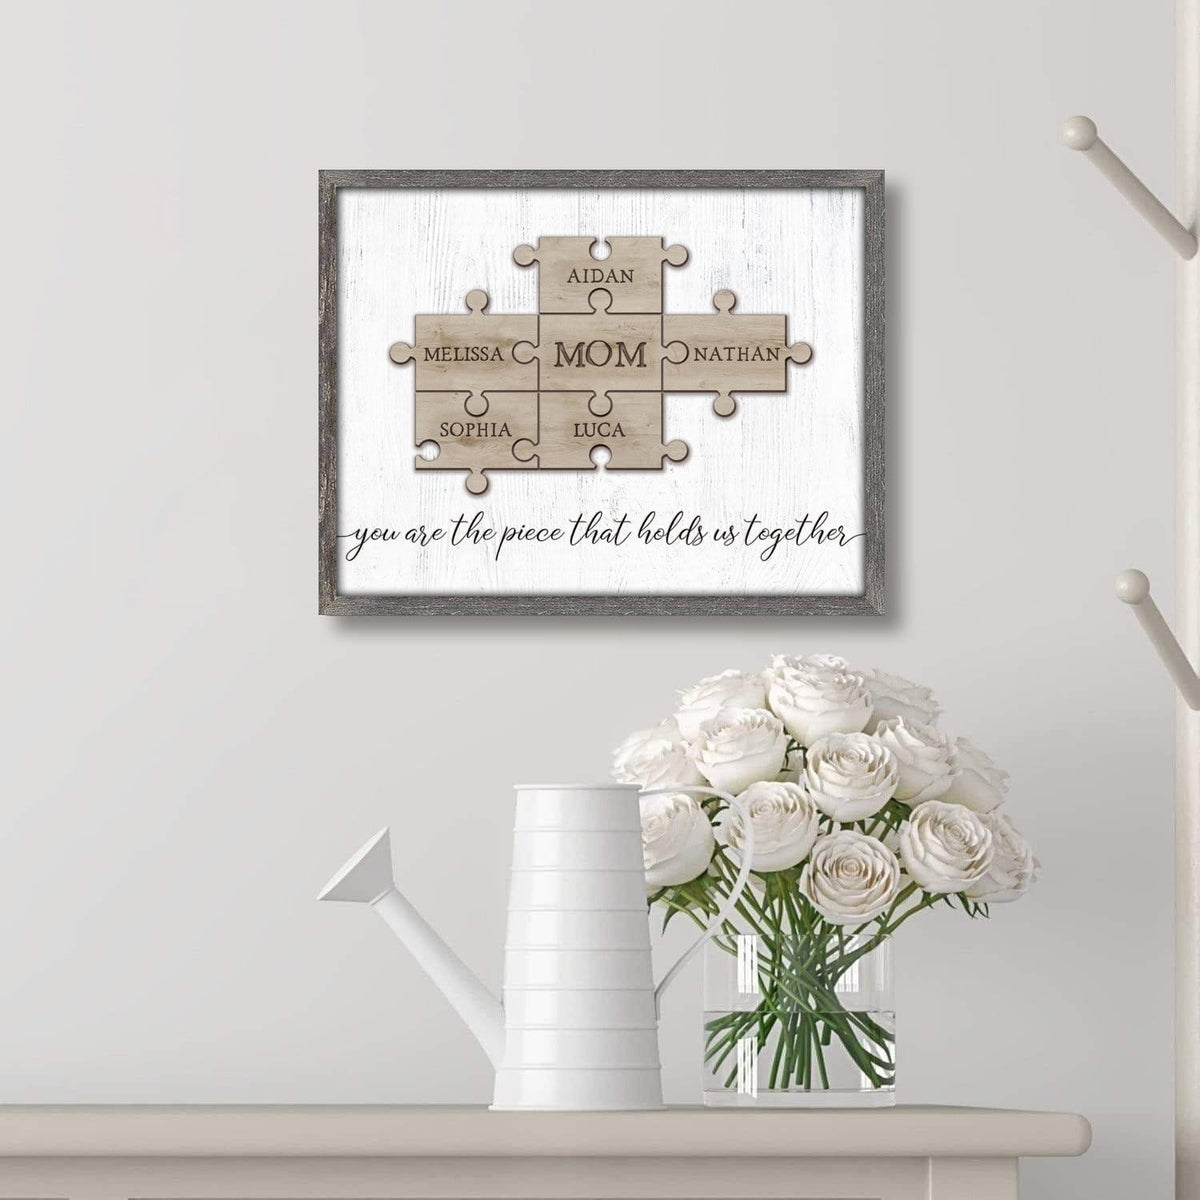 Personalized puzzle piece gift for mom